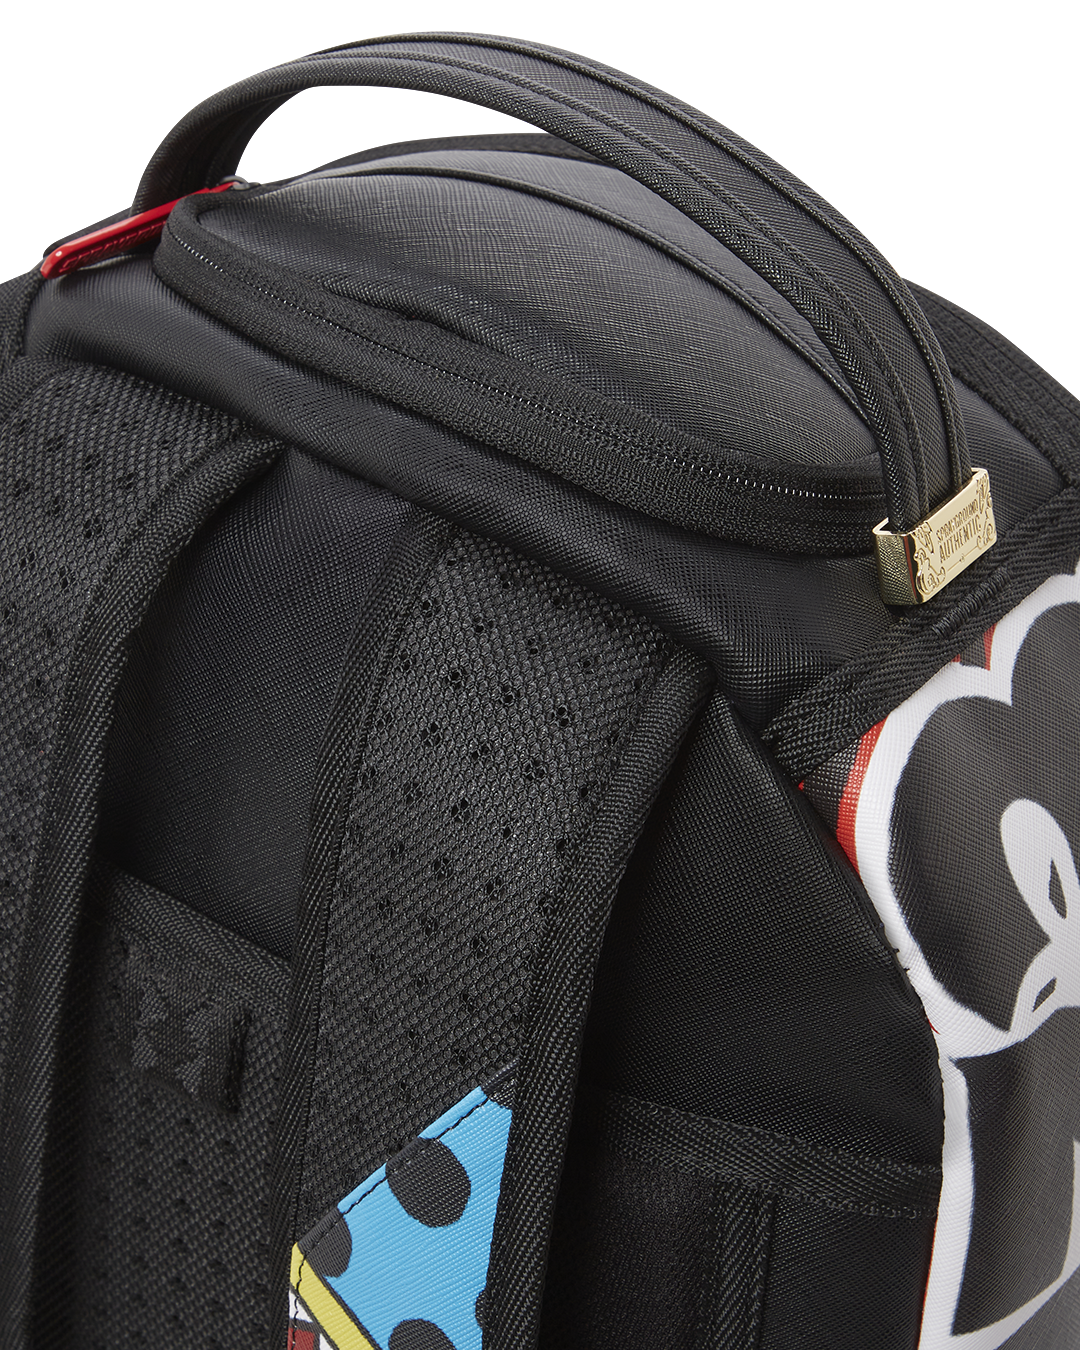 SPRAYGROUND® BACKPACK PORSCHE 1972 COLLAB BACKPACK (ONLY 1,1911 UNITS MADE)